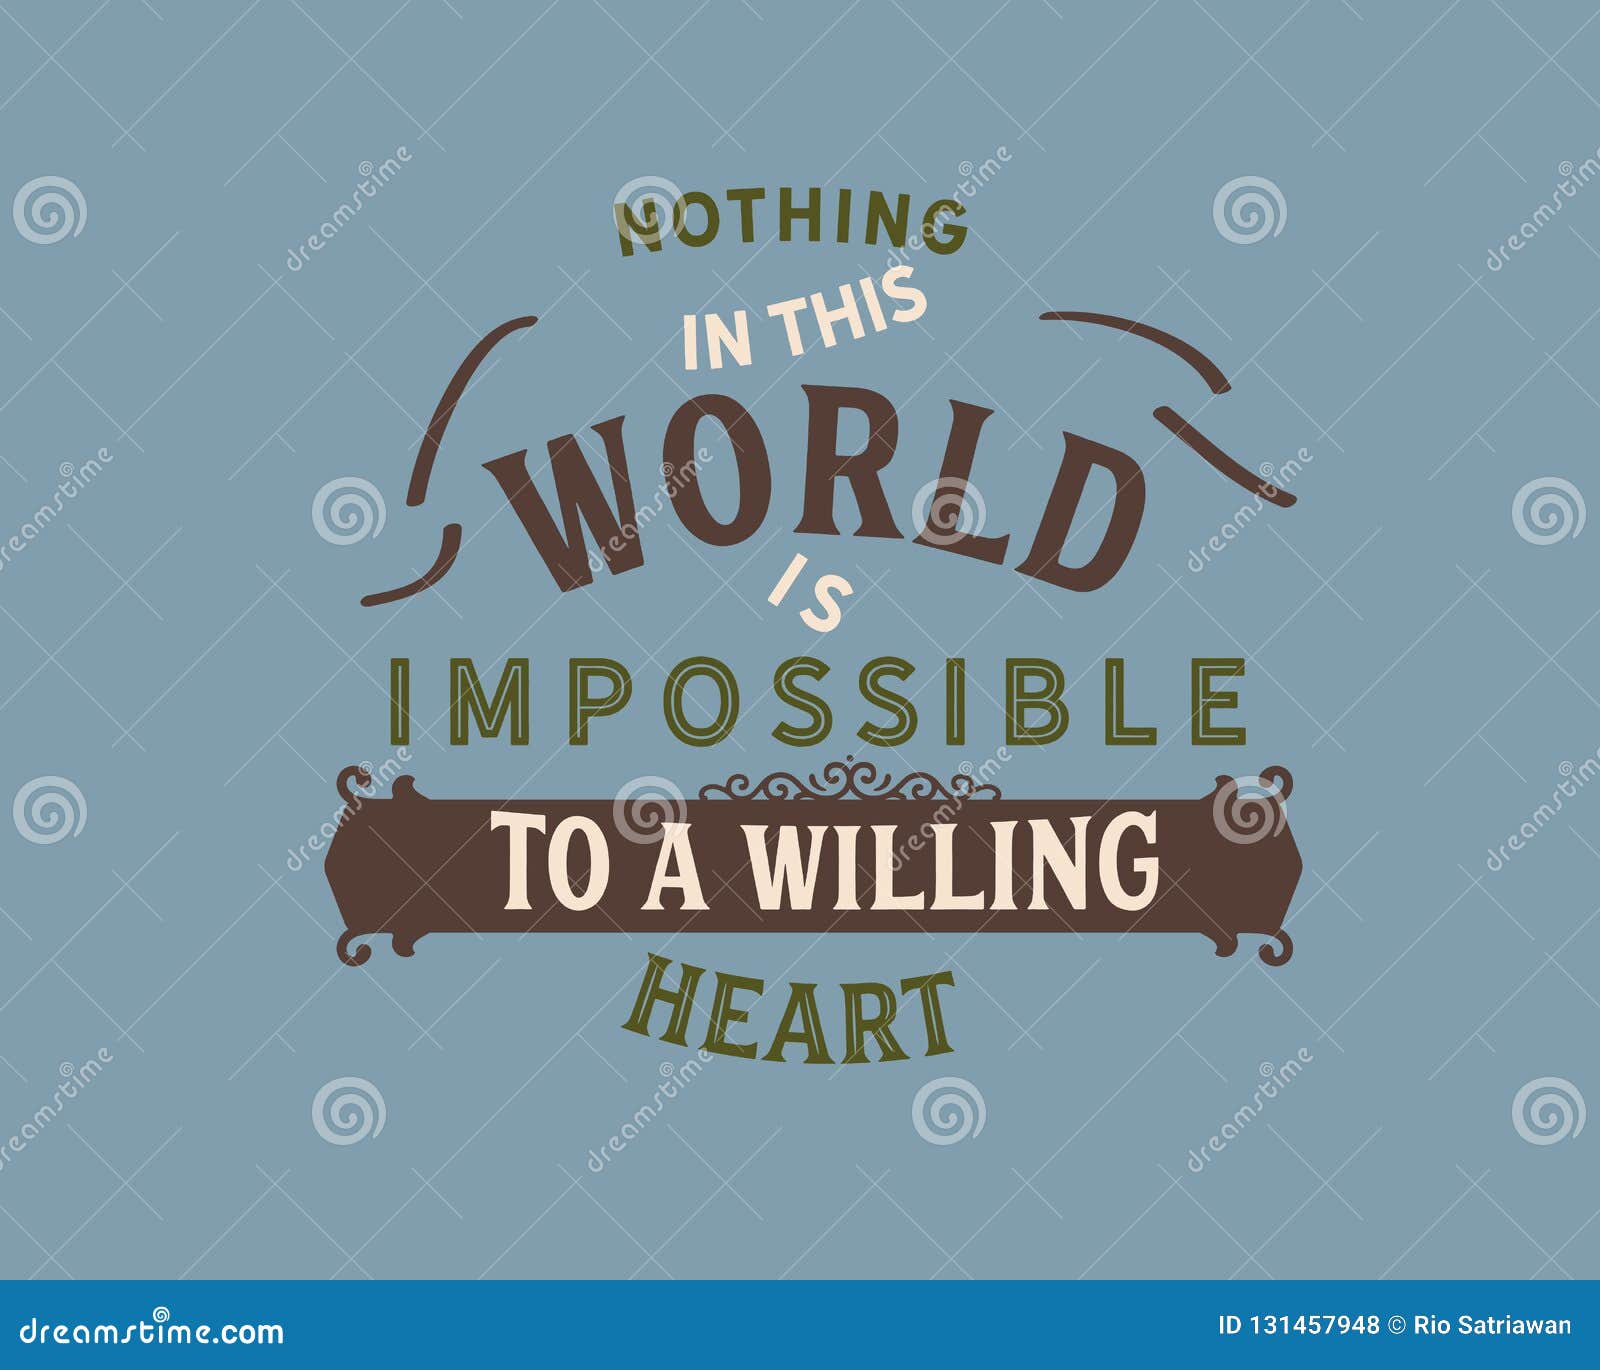 story on nothing is impossible to a willing heart